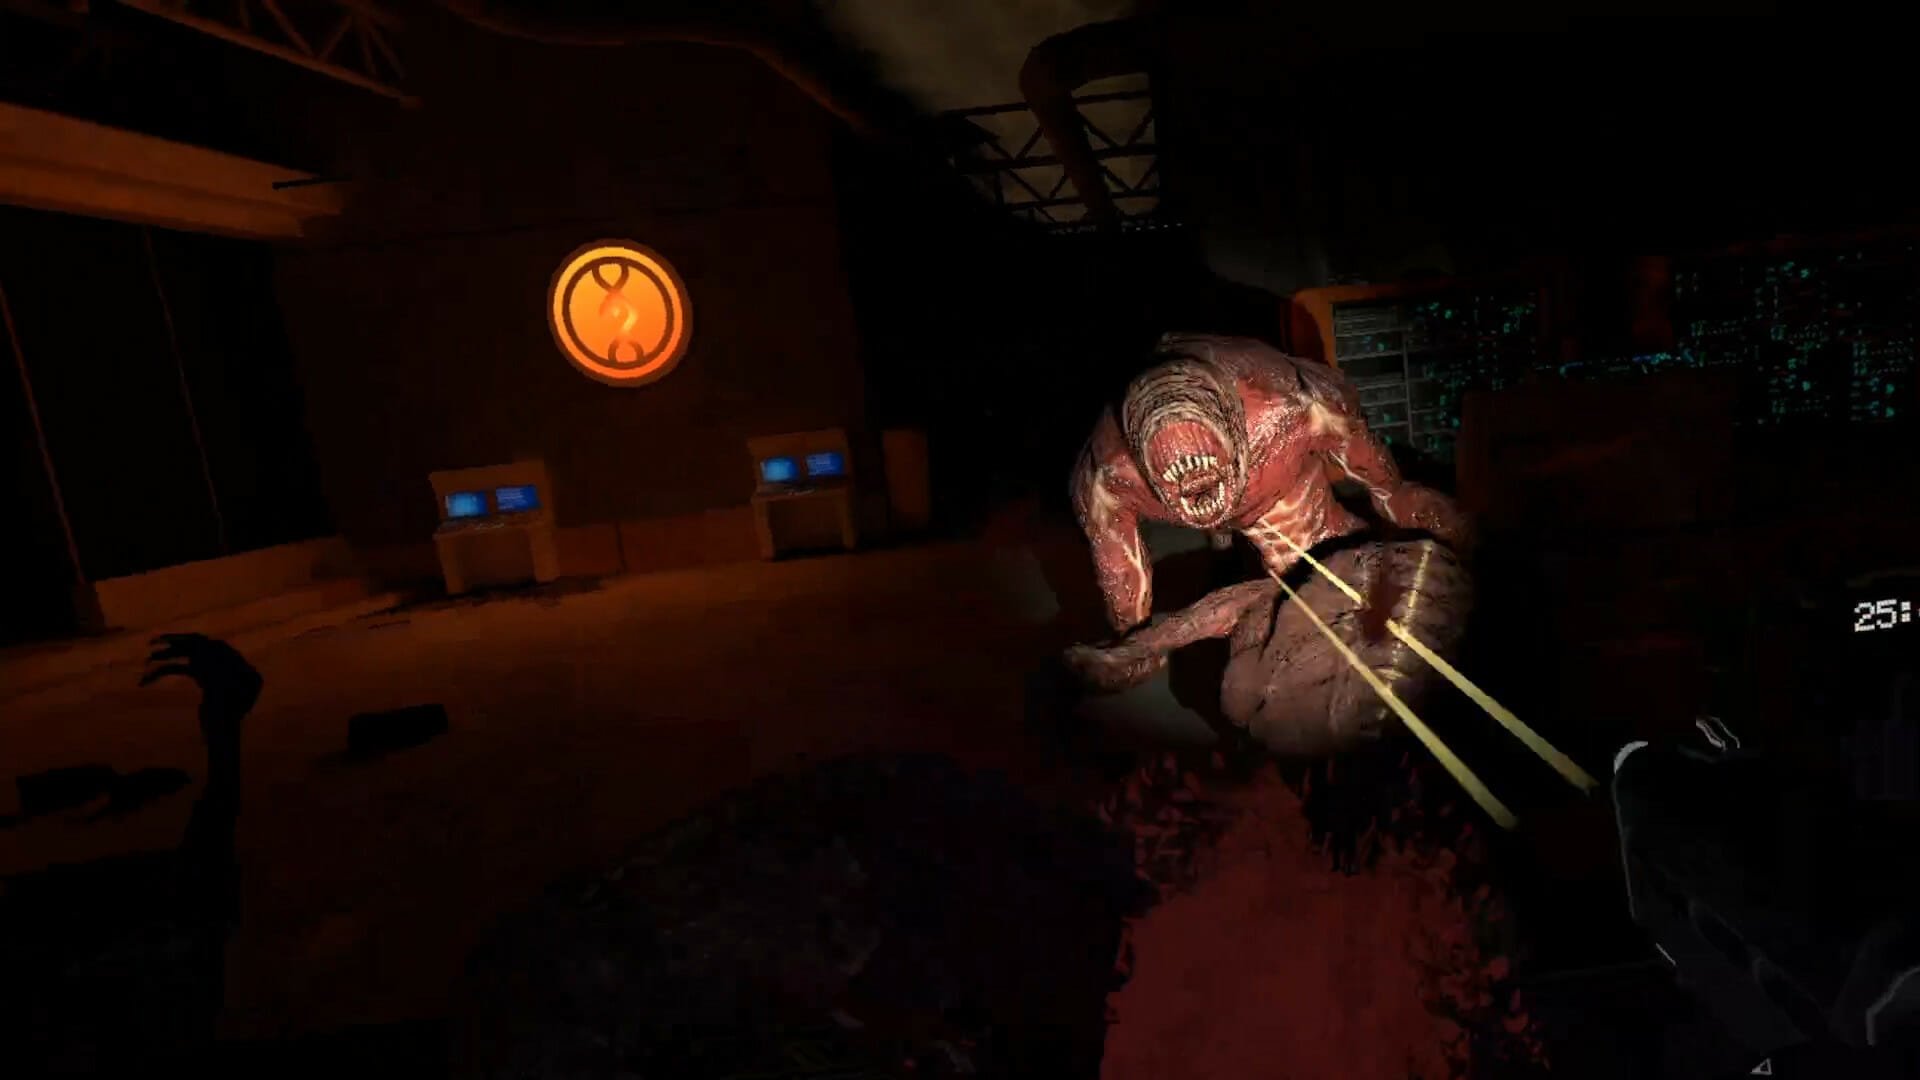 An image that shows the player shooting a creature